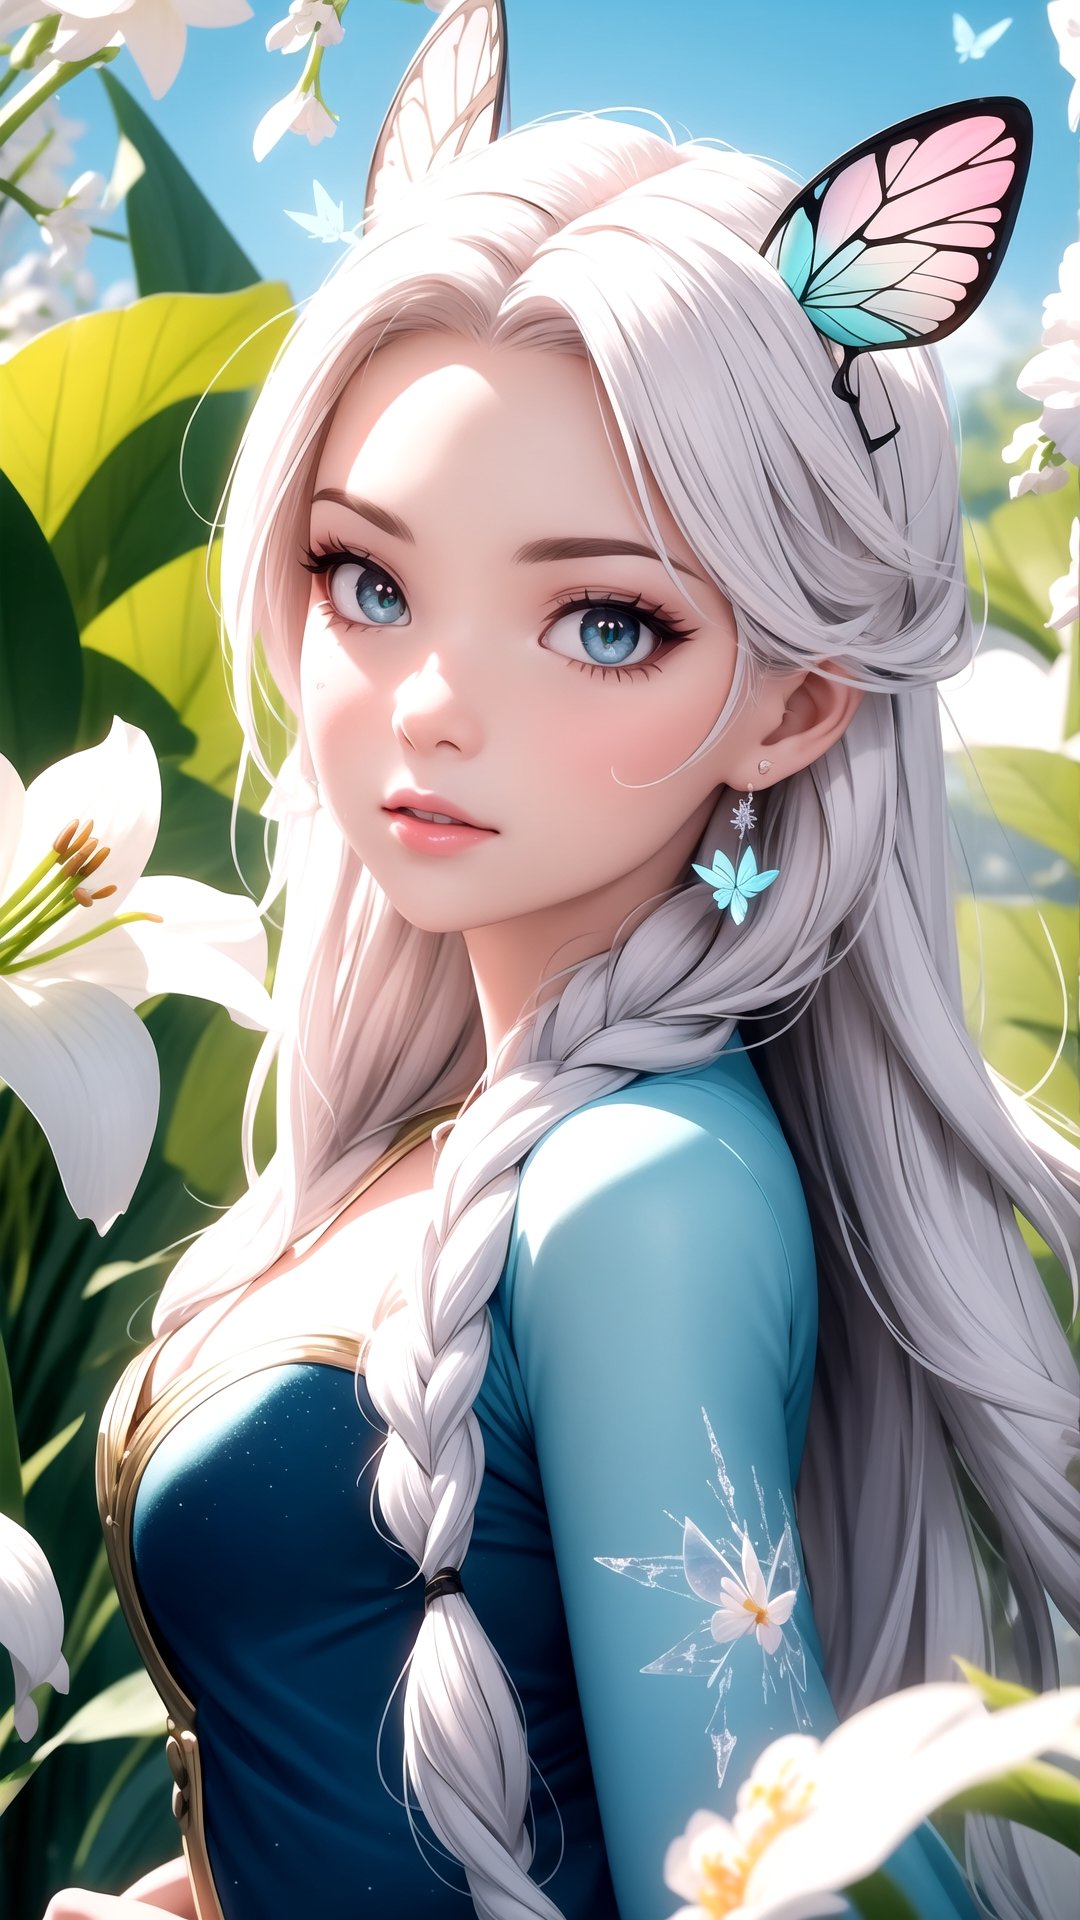 Real-life Elsa from Frozen travels the world as a social media influencer and showcases her Disneyland experiences on the lavish floral Versailles balcony Elsa's eye makeup from Disney's Frozen 》, in a Christmas paradise surrounded by magic butterflies 🦋 ✨ Colorful lights hanging on the lily of the valley, photo style - realistic techniques, kawaii aesthetics, cute and colorful, colorful garden, colorful, naturecore, realistic use of light and color